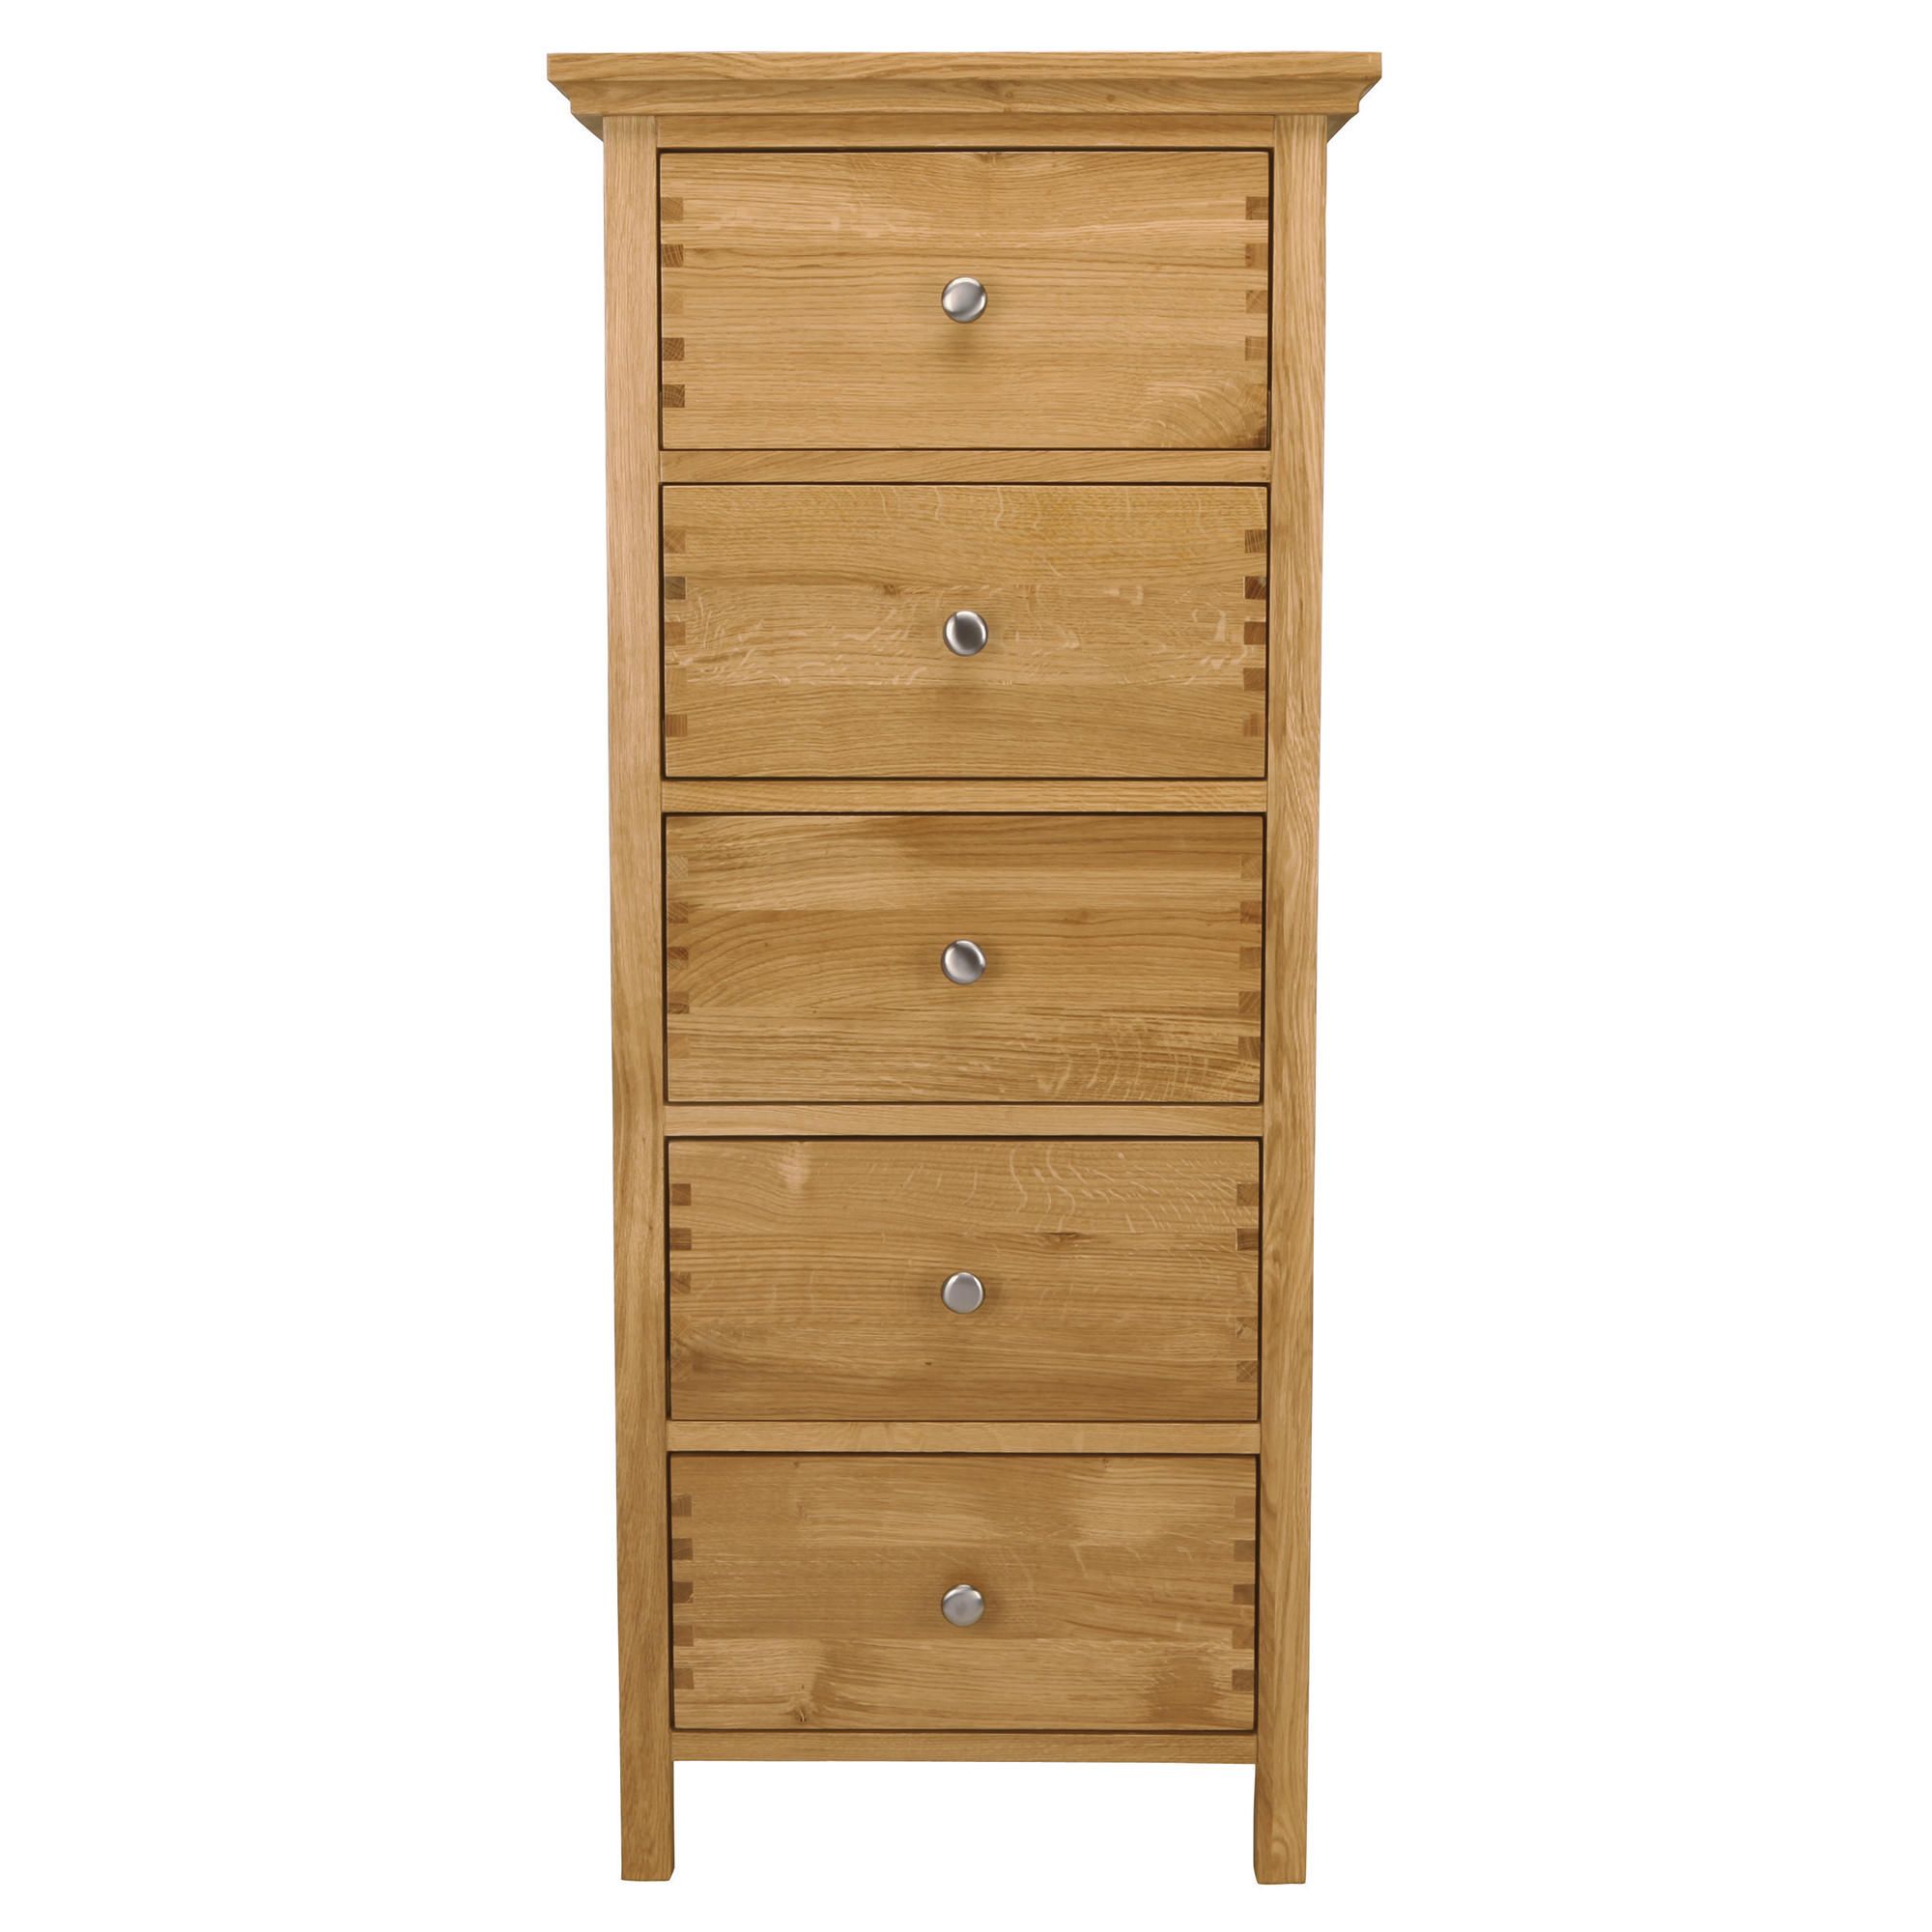 Hampstead 5 Drawer Chest, Oak at Tesco Direct